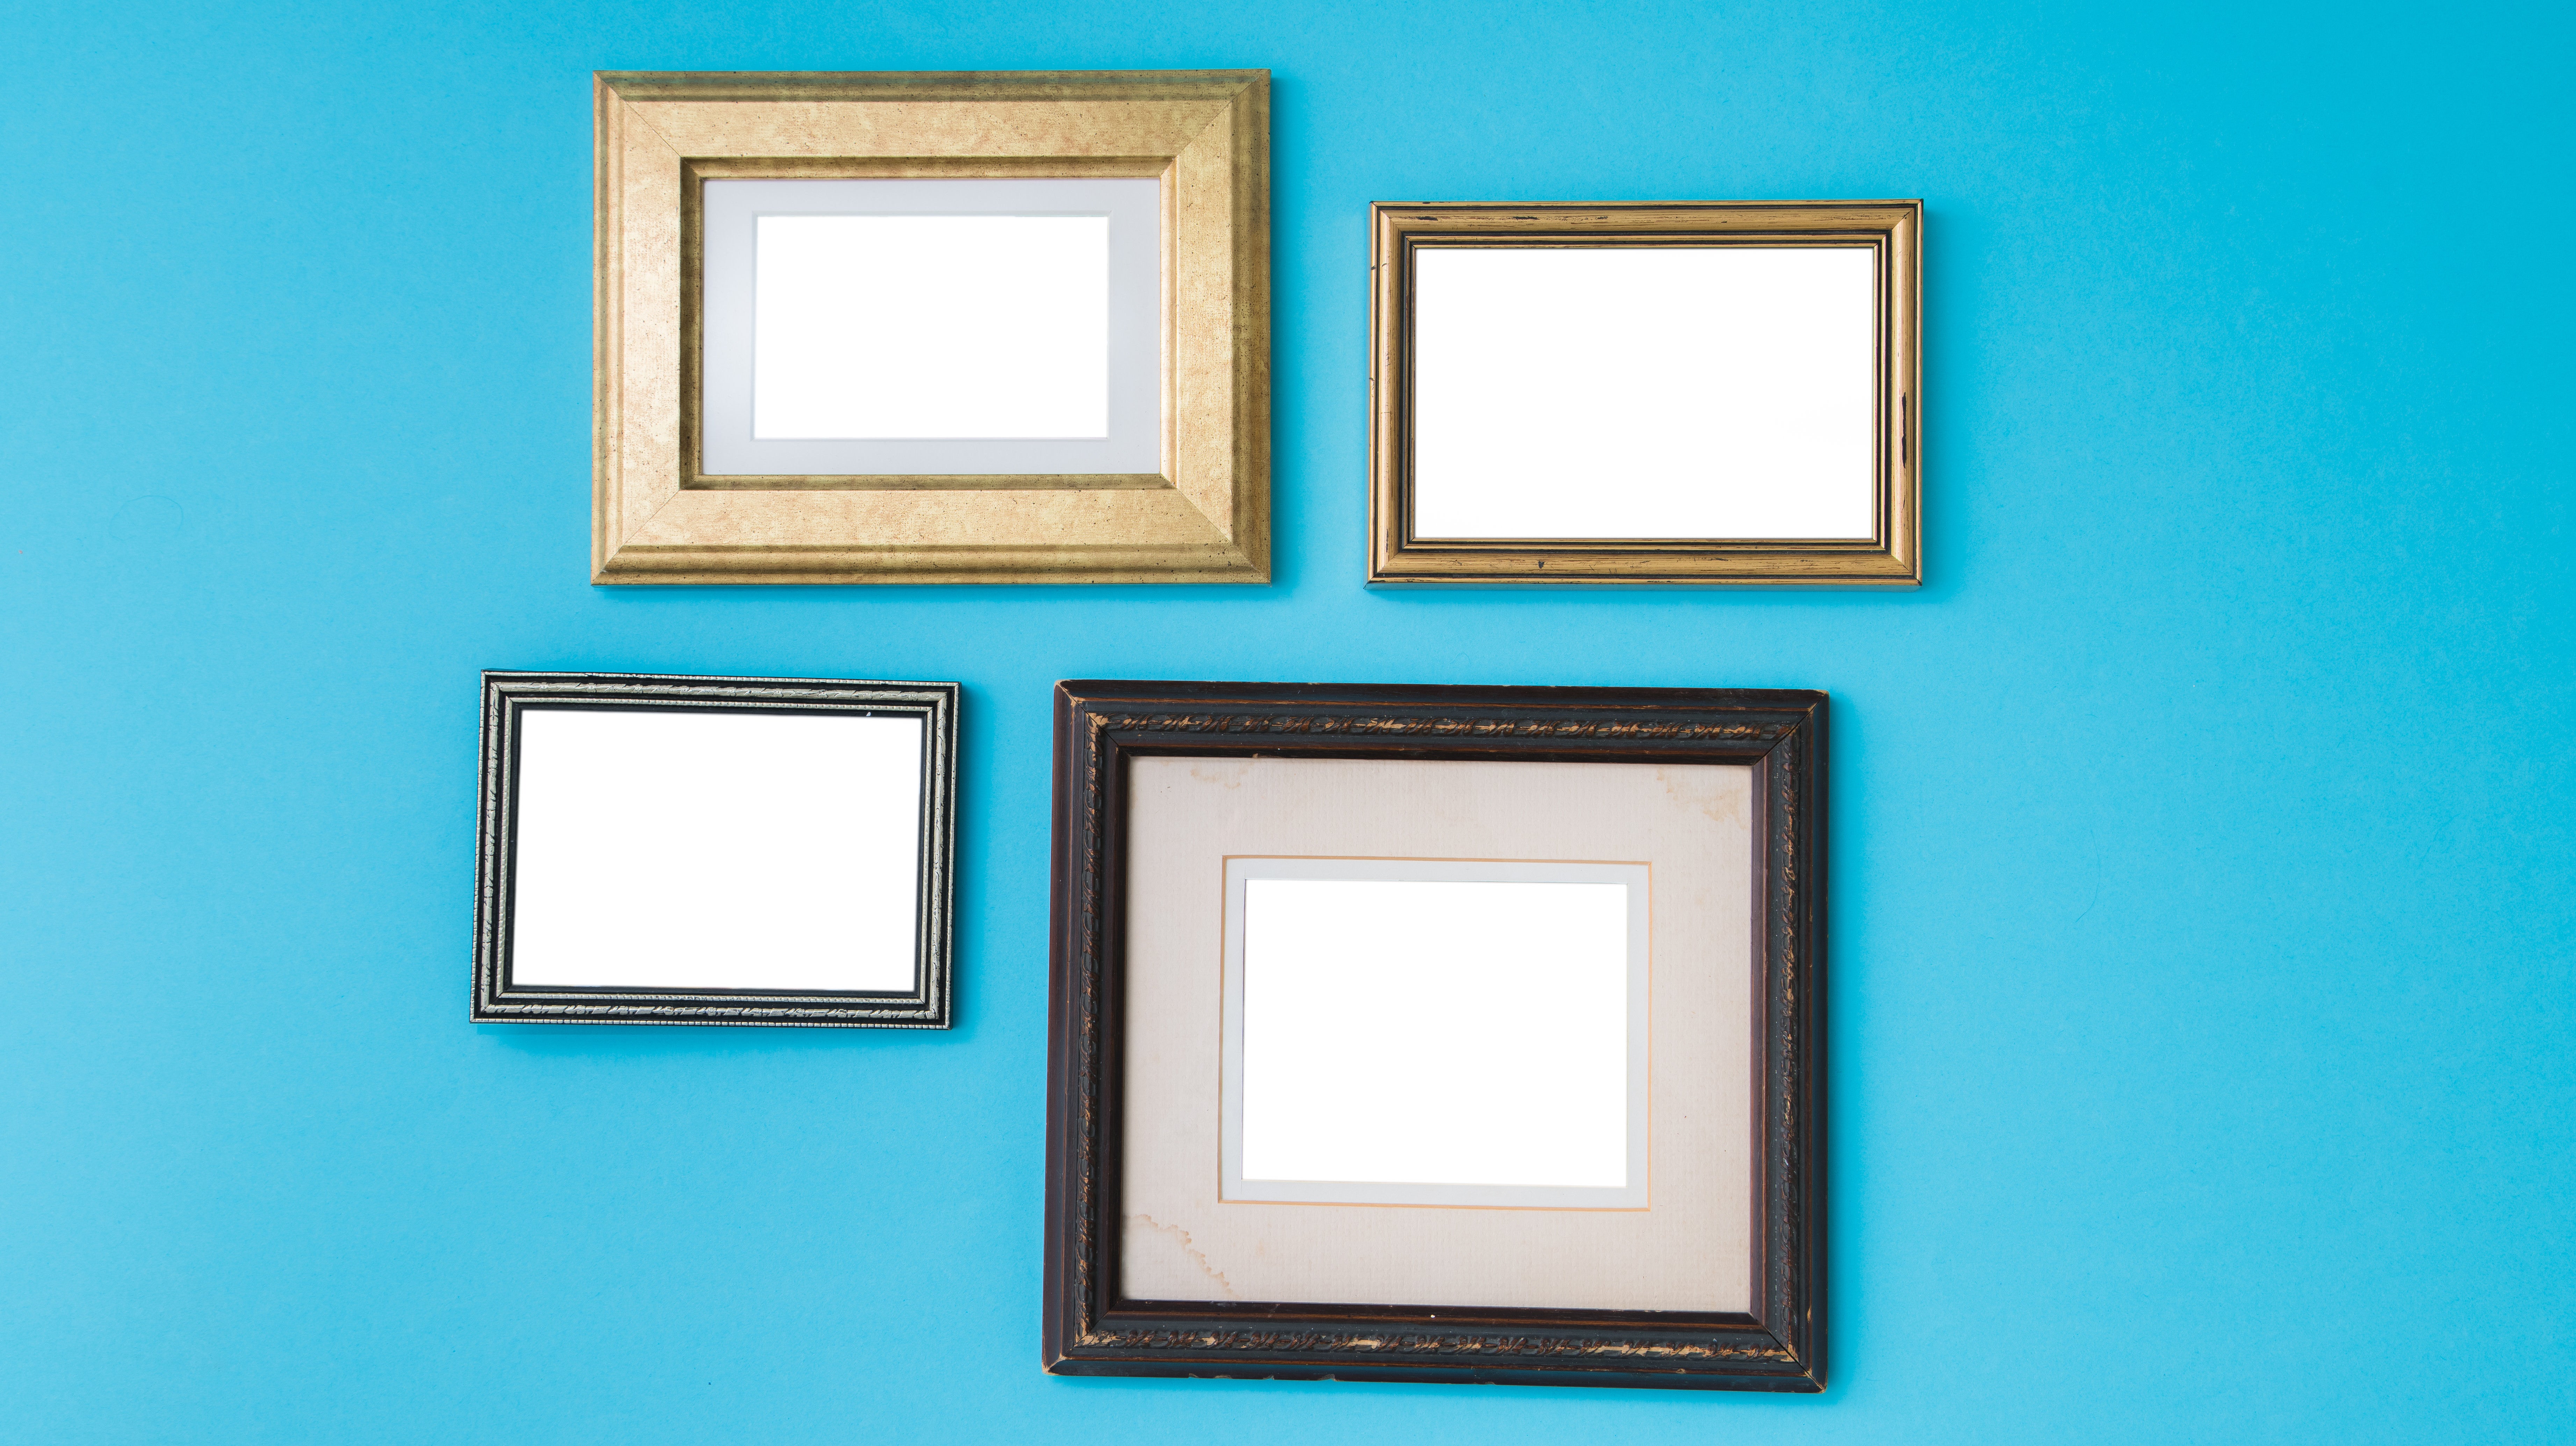 How To Hang Pictures Without Destroying Your Walls,Tile On All Bathroom Walls